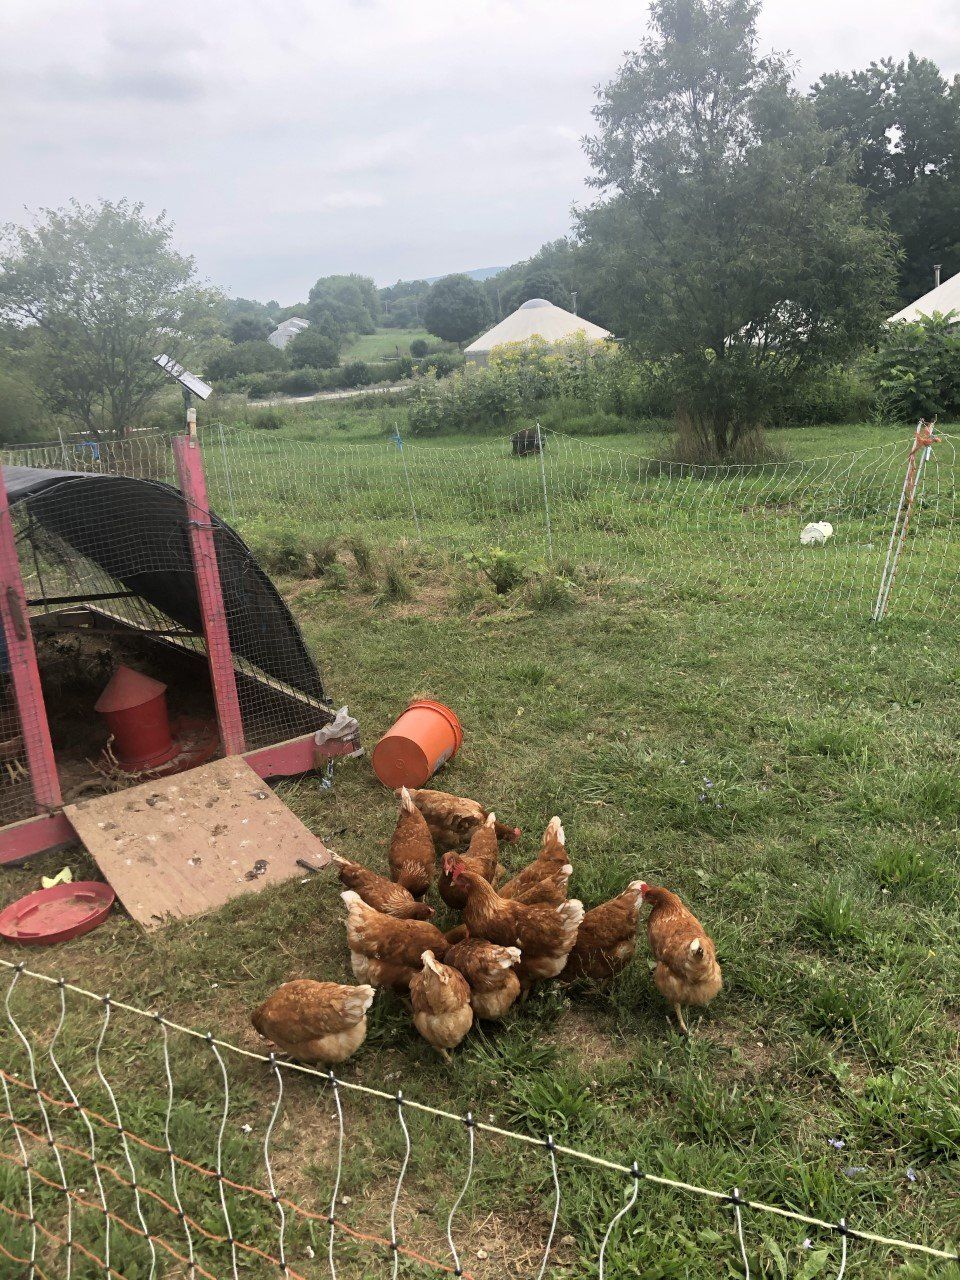 Previous Happening: Farm Happenings for August 21, 2020